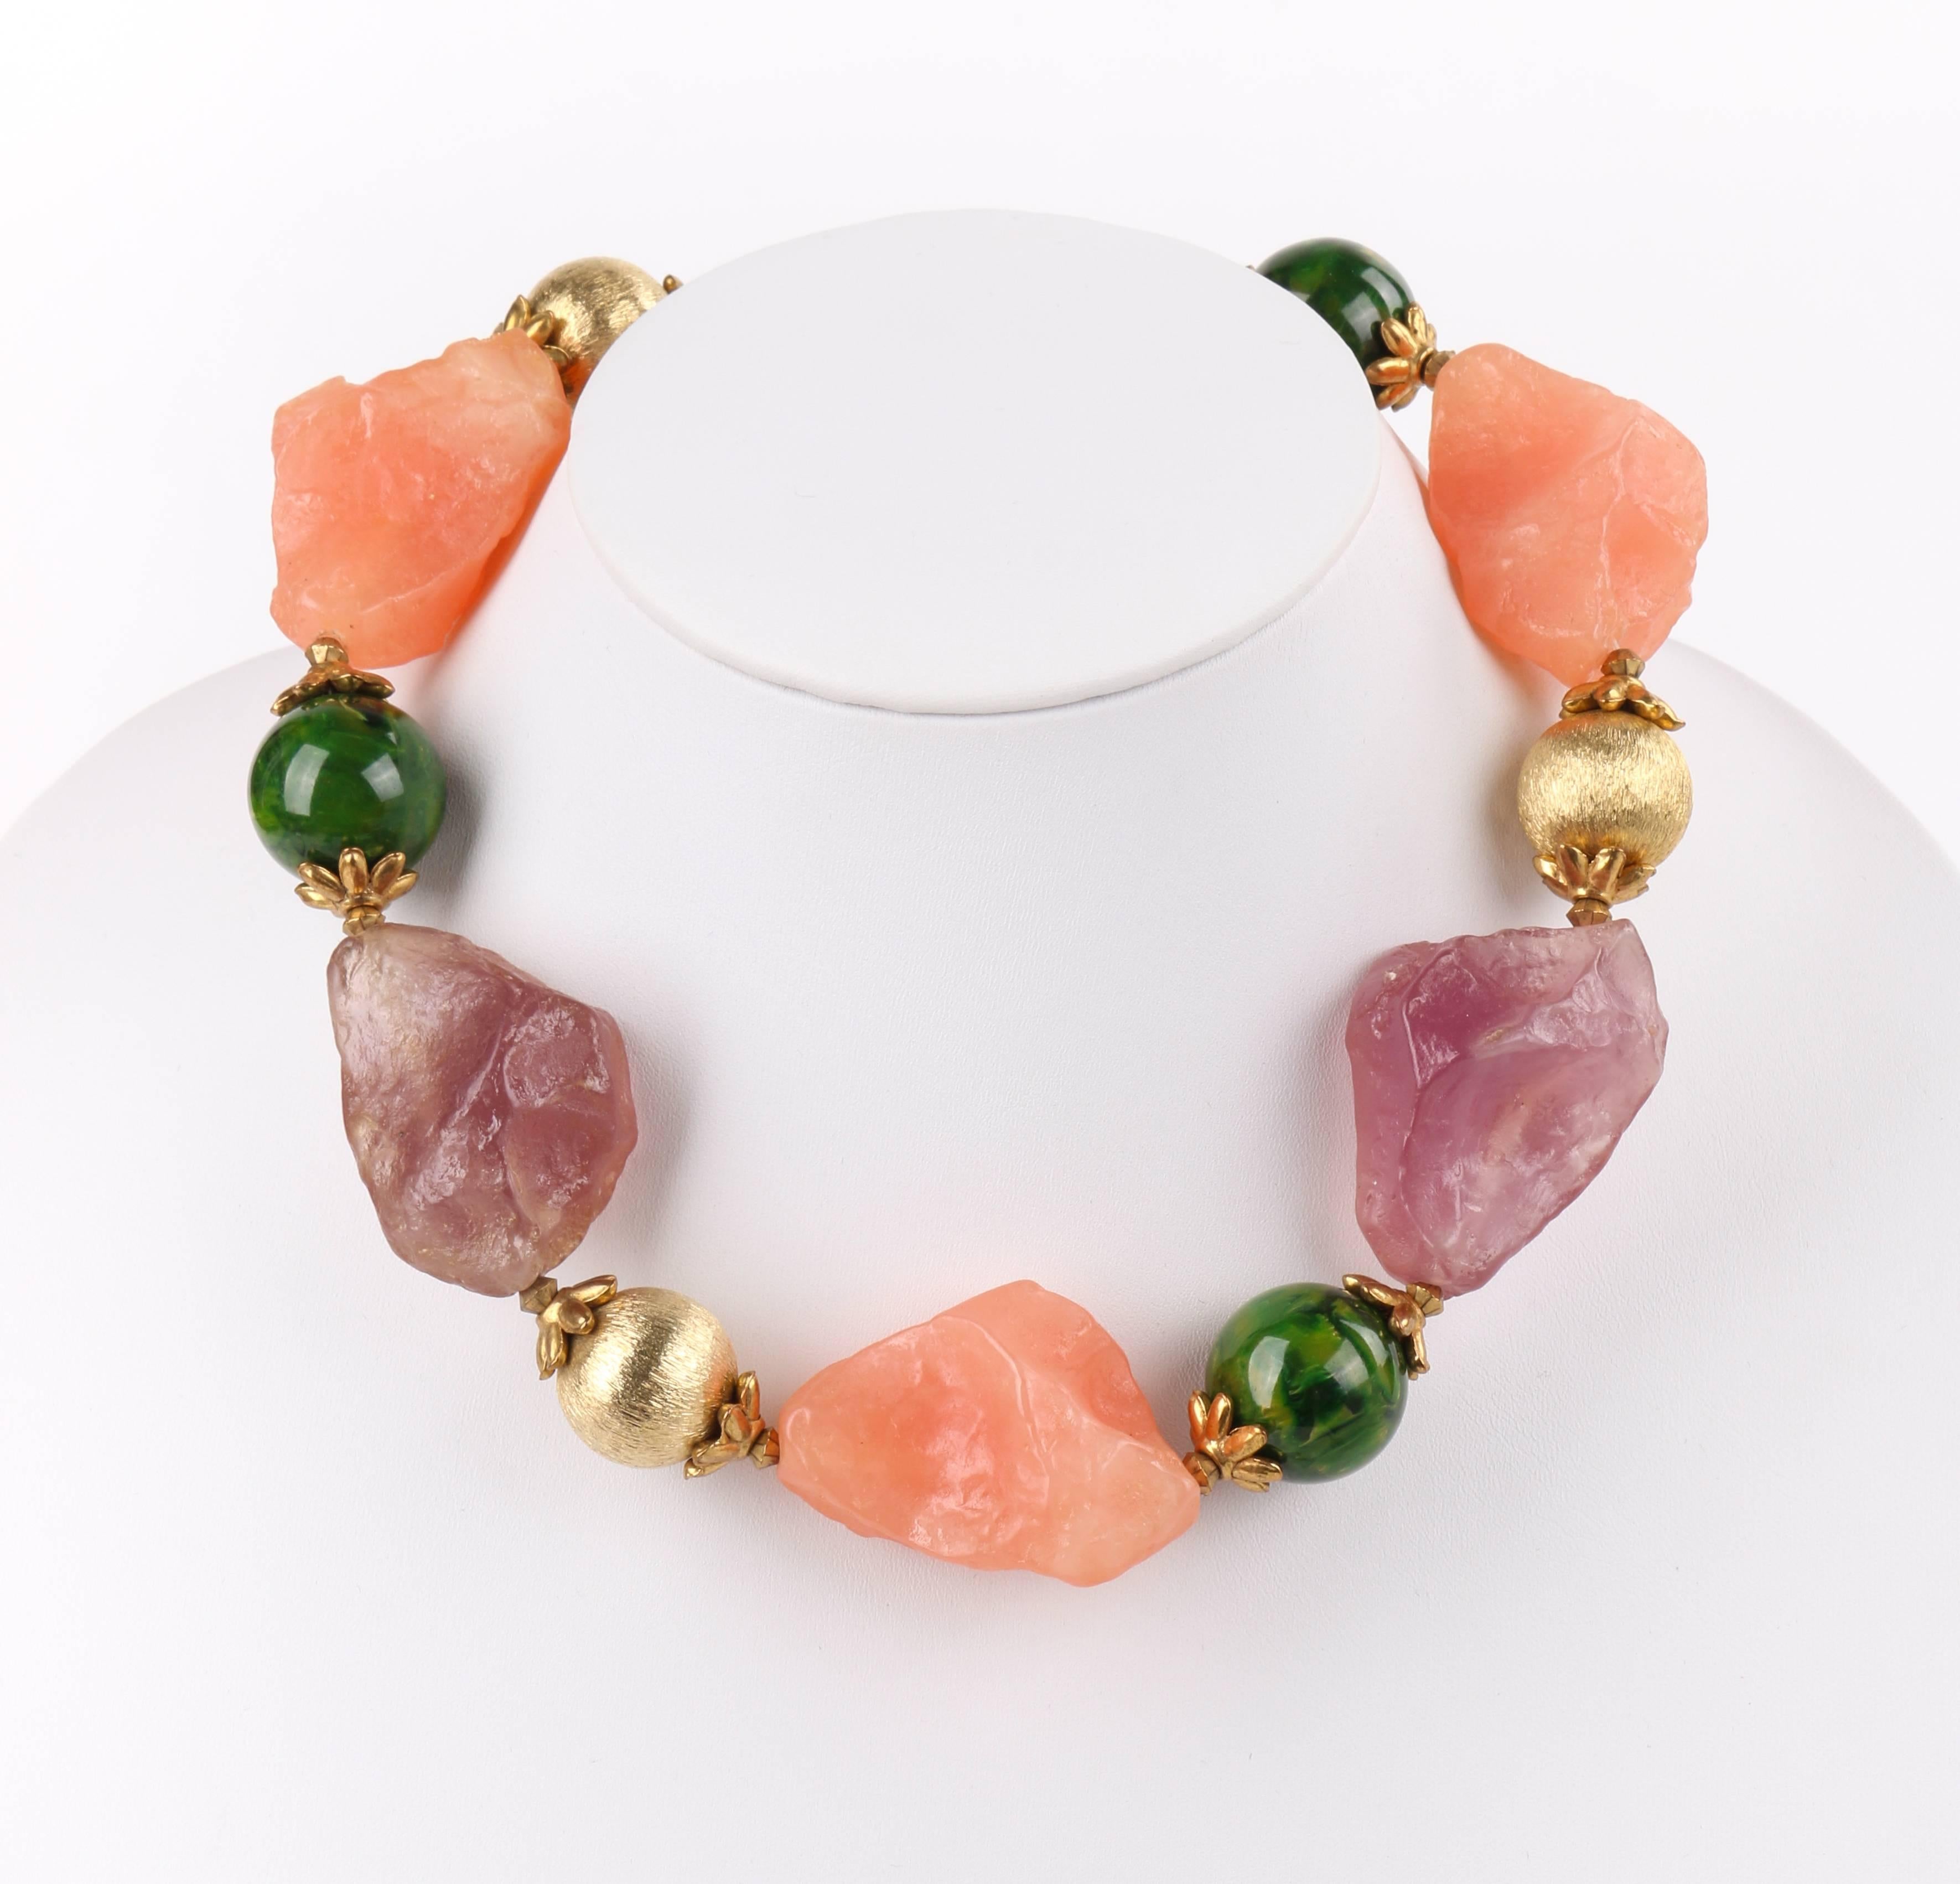 Vintage Cadoro c.1950's multi-color raw stone and spherical bead choker necklace. Designed by Steven Brody and Daniel Stoenescu. Three green marbleized lacquer over Bakelite and three gold-toned textured spherical beads are alternated between five